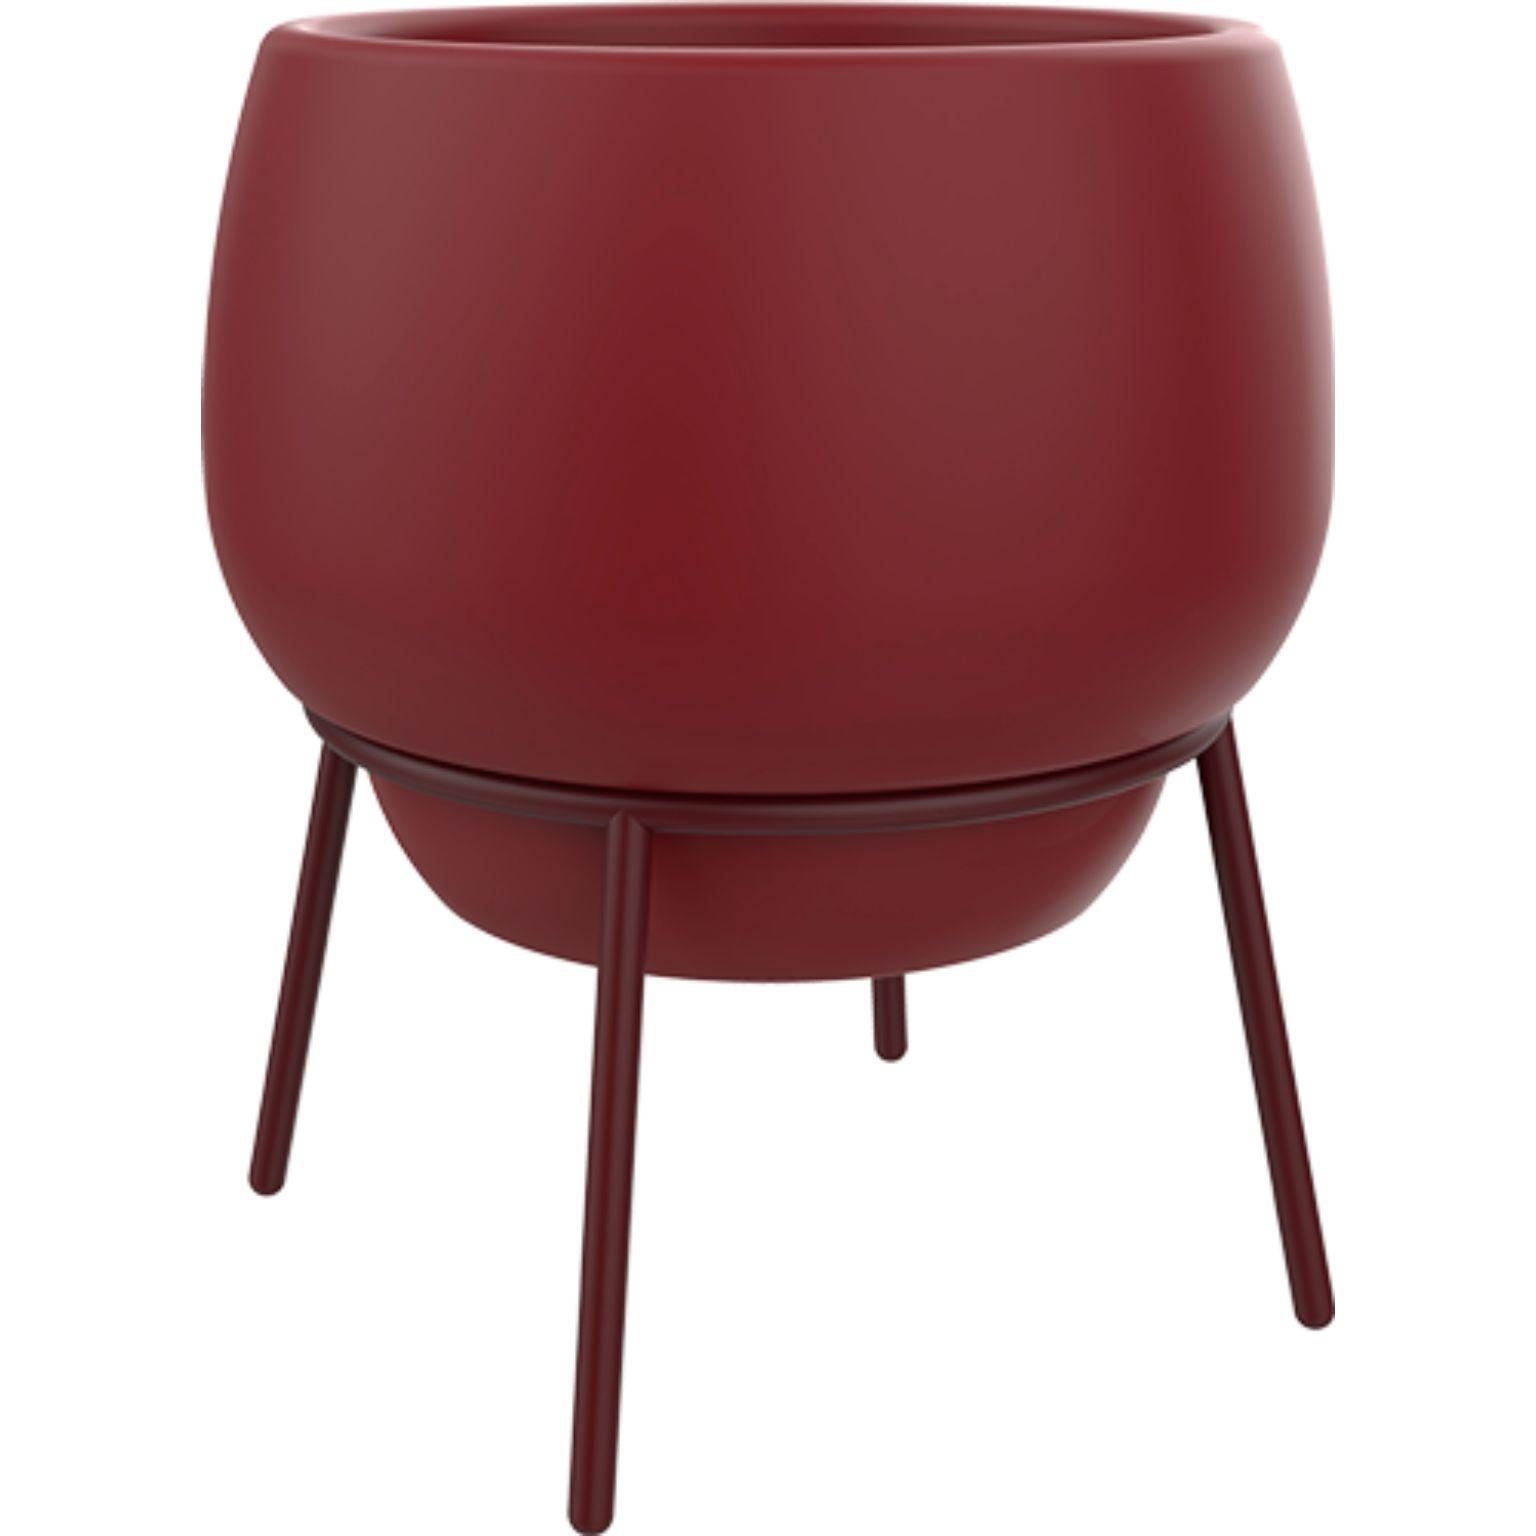 Lace Burgundy 65 pot by Mowee
Dimensions: Ø71 x H76 cm
Material: Polyethylene and stainless steel.
Weight: 9 kg.
Also available in different colors and finishes (Lacquered or retroilluminated).

Lace is a collection of furniture made by